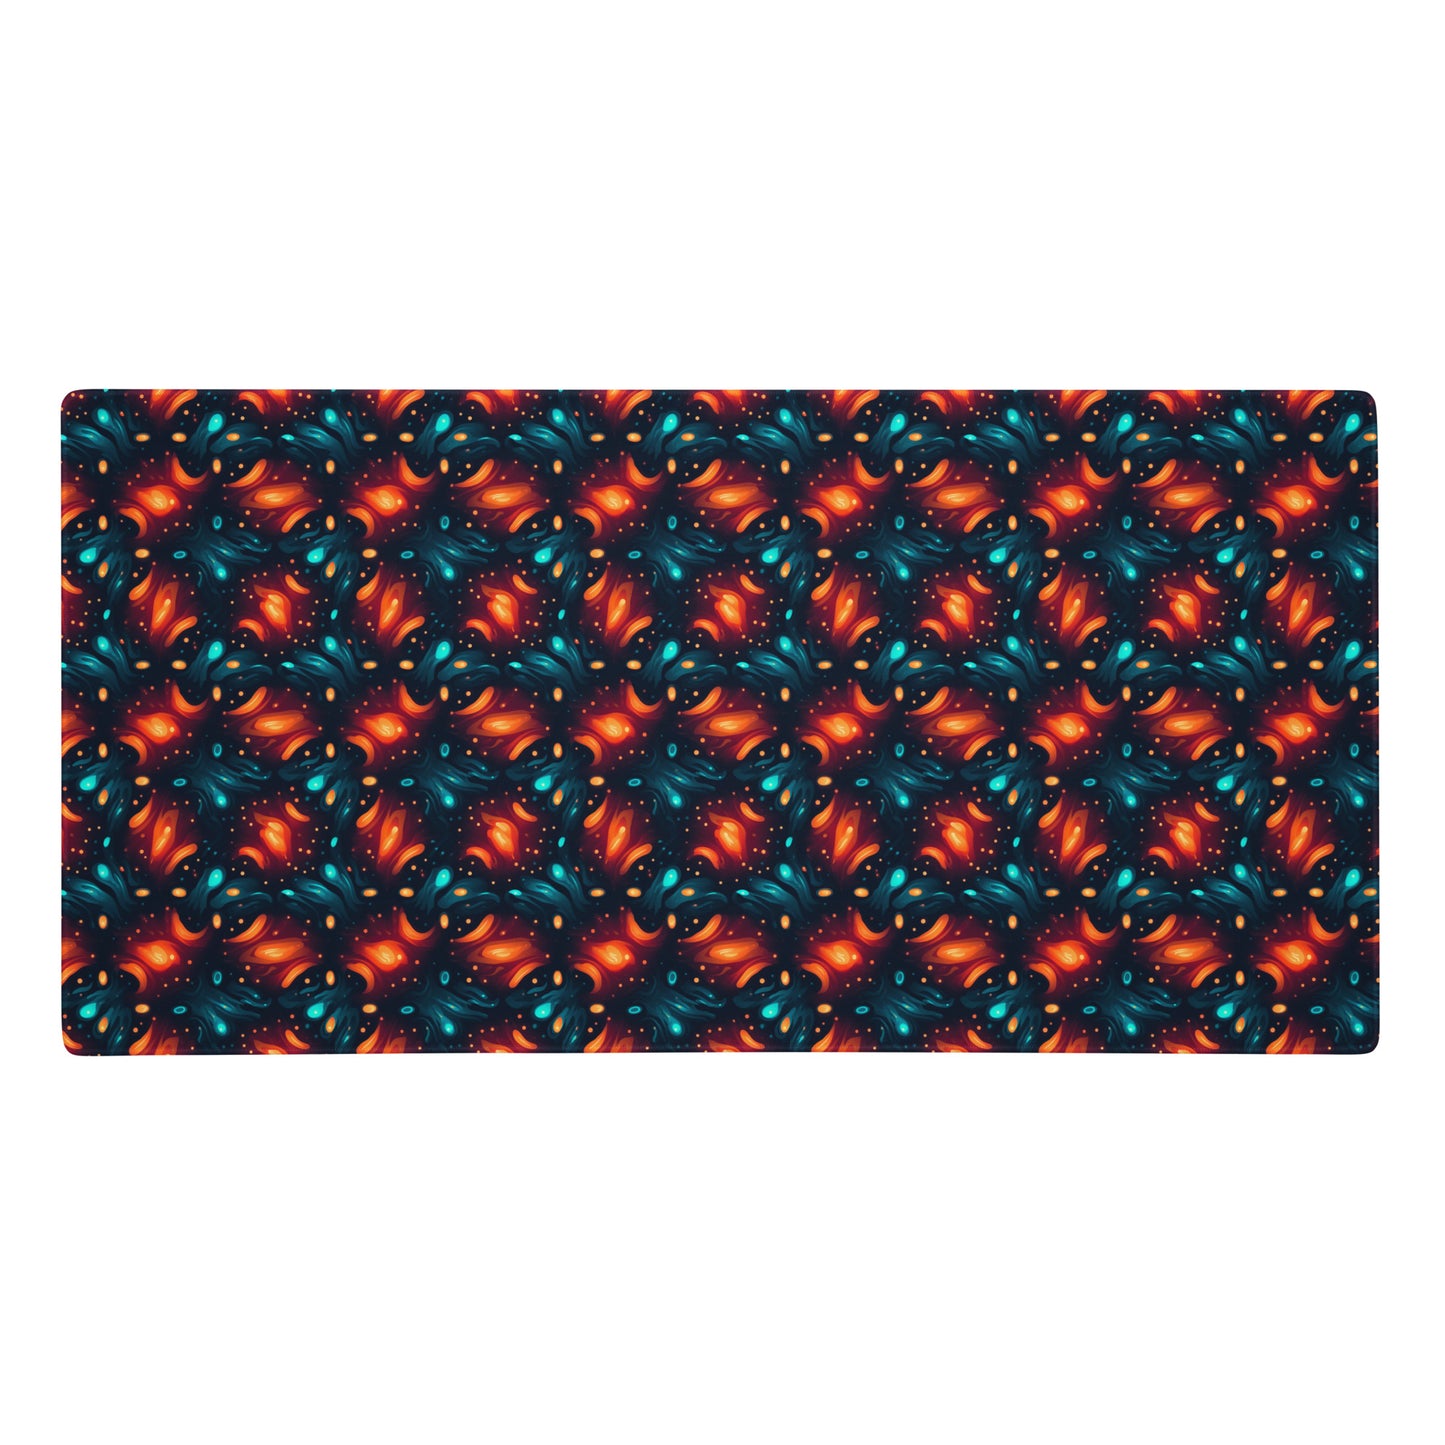 A 36" x 18" desk pad with a blue and orange abstract cross hatch pattern.